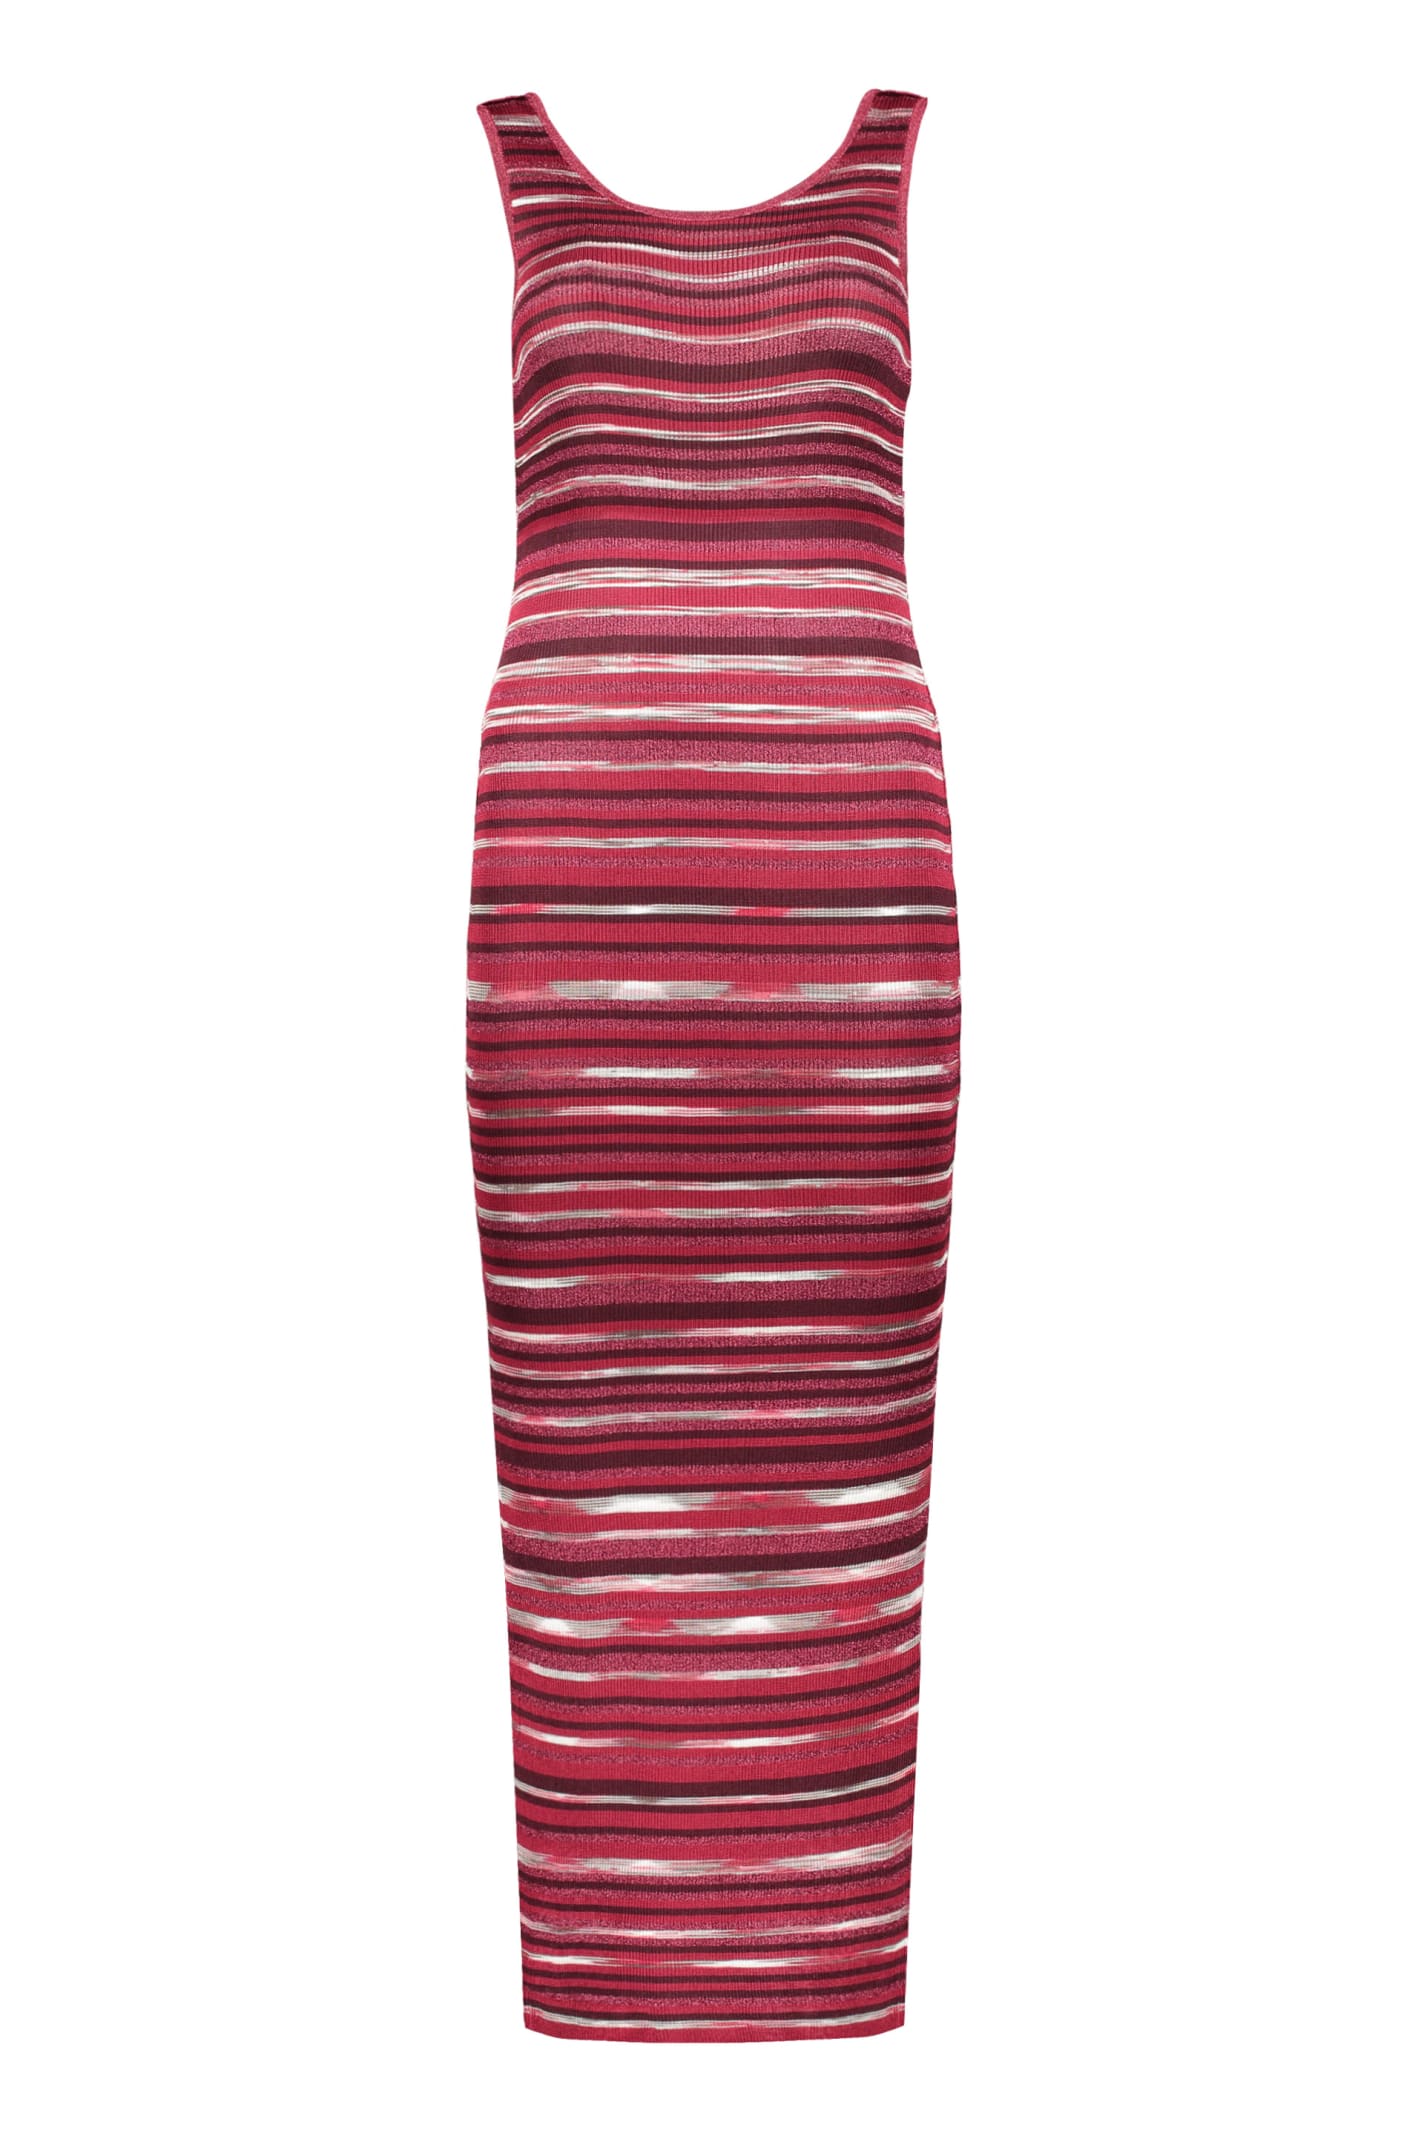 Missoni Ribbed Knit Dress In Red-purple Or Grape